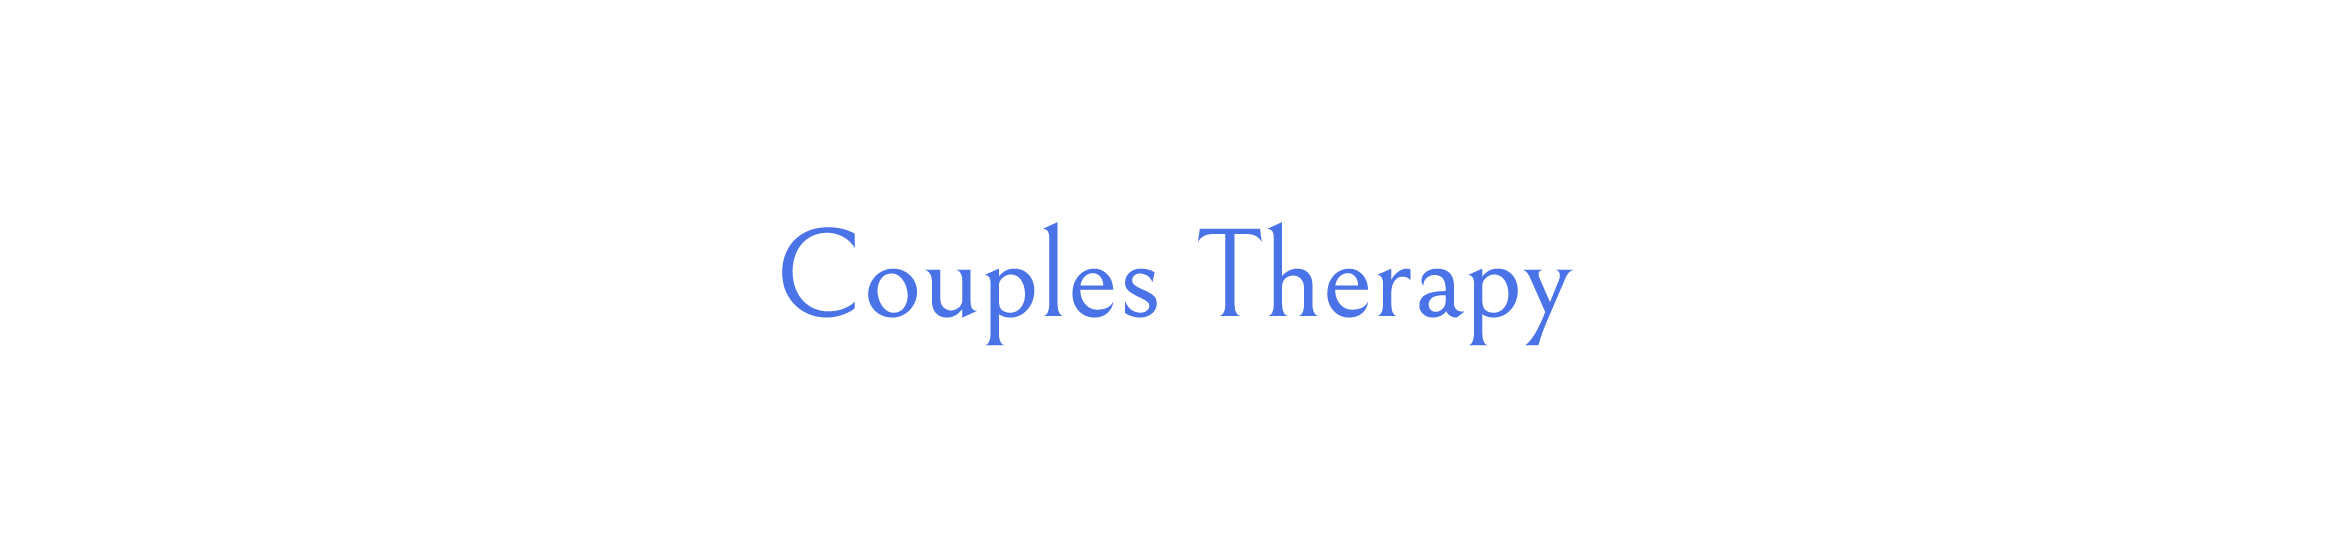 Couples Therapy banner